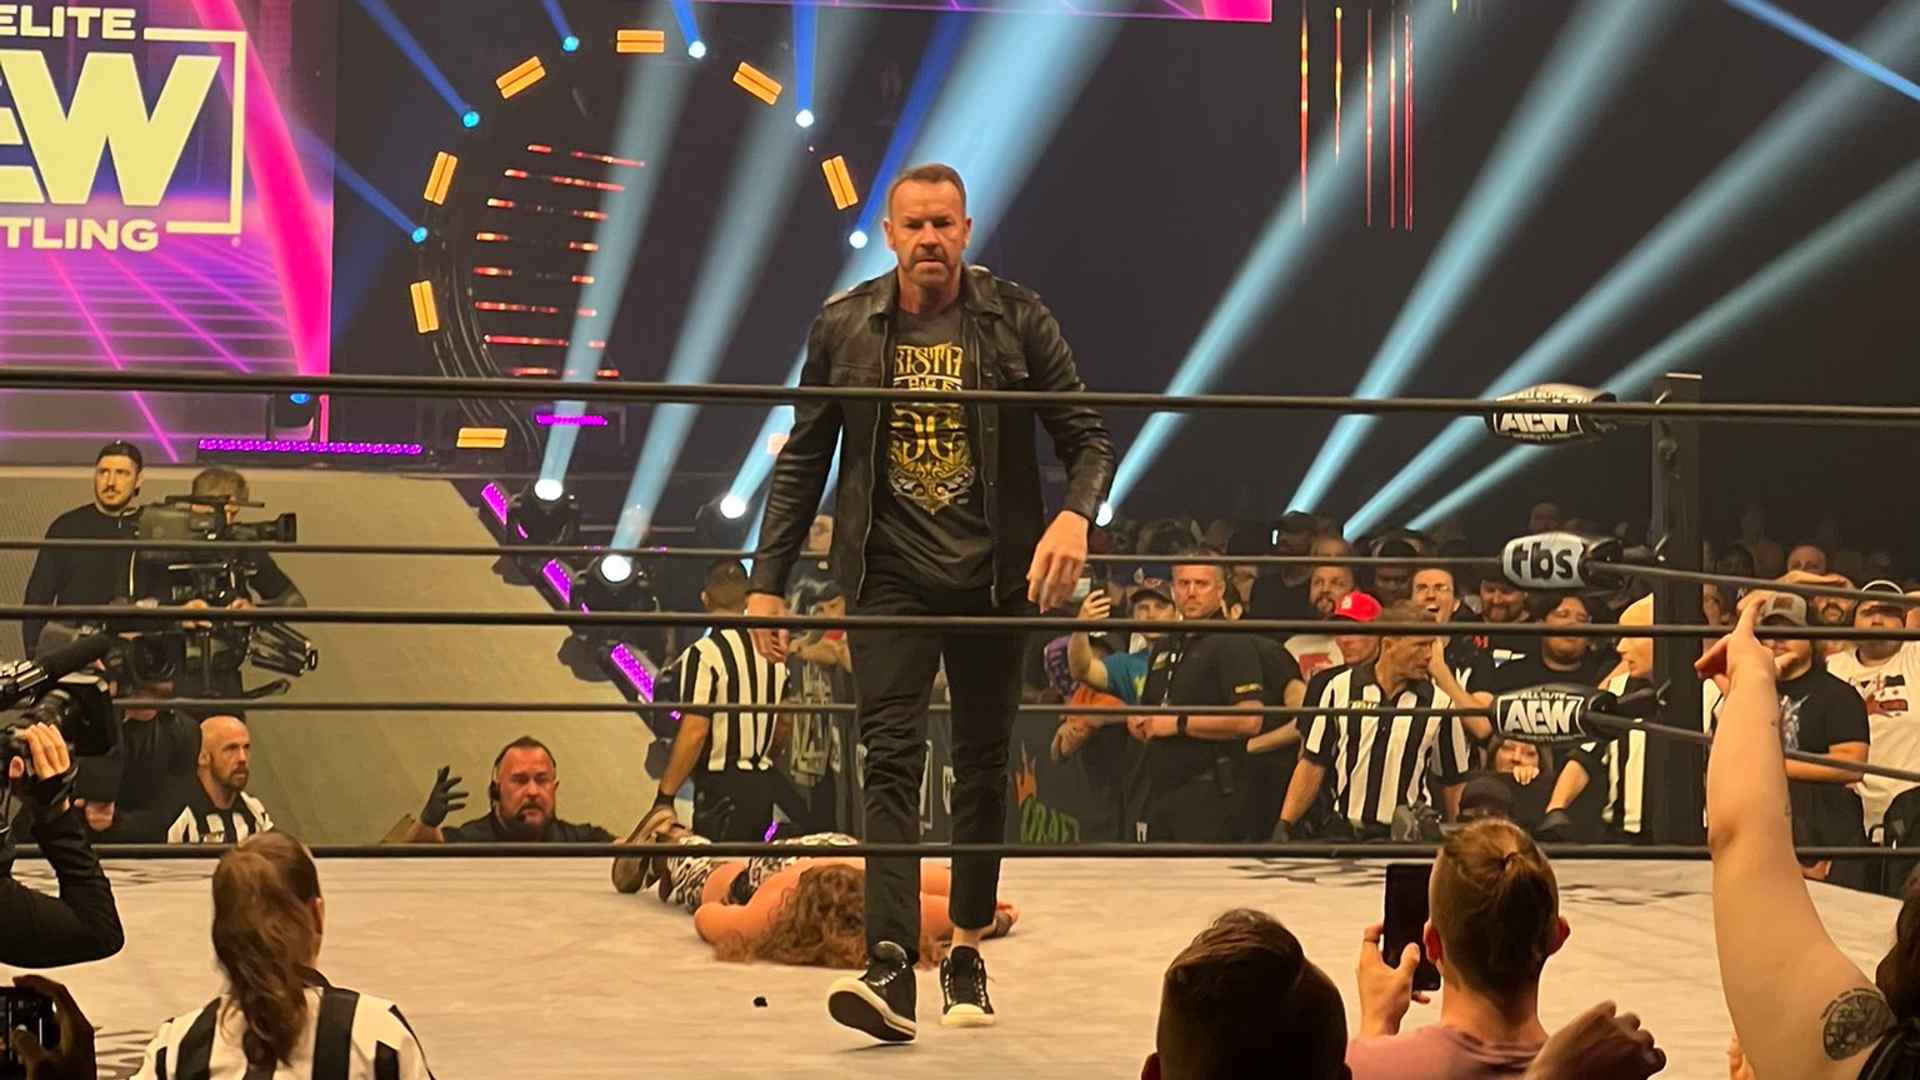 Christian Cage got his daughter thrown out from AEW Collision